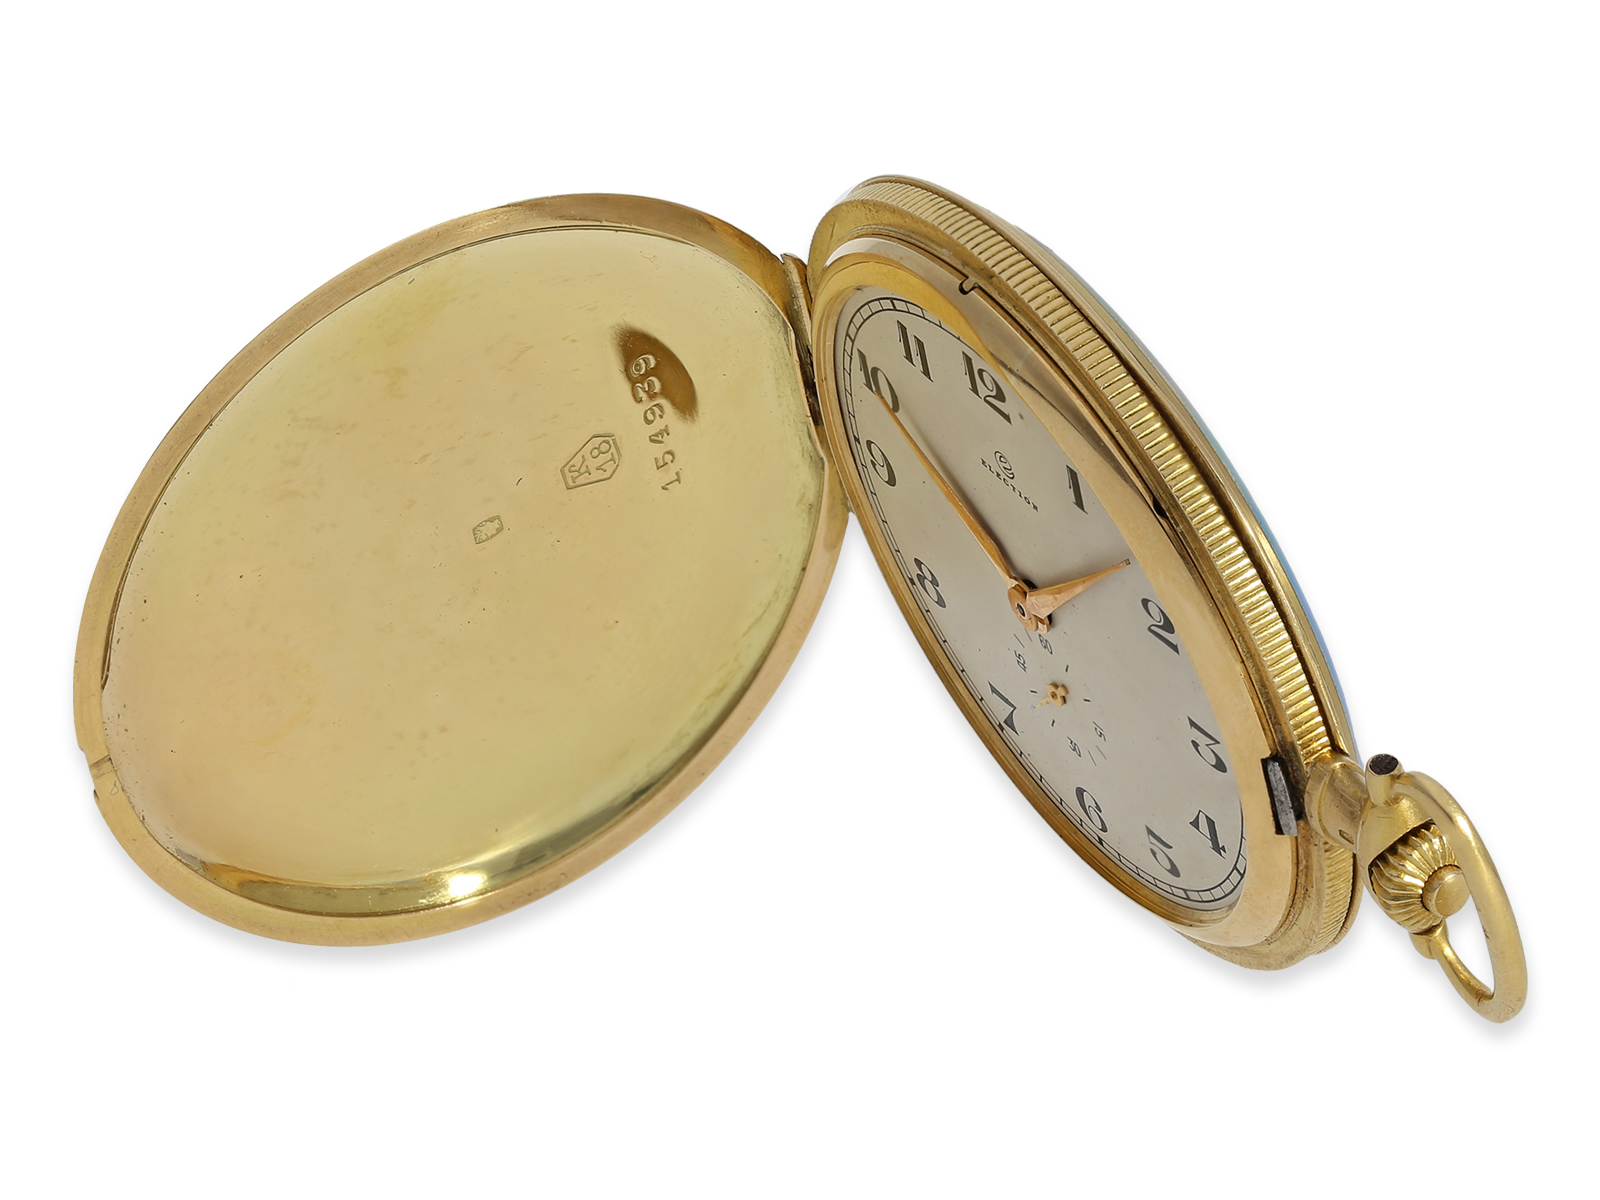 Pocket watch: extremely rare gold/enamel hunting case watch for the Indian market with representatio - Image 8 of 8